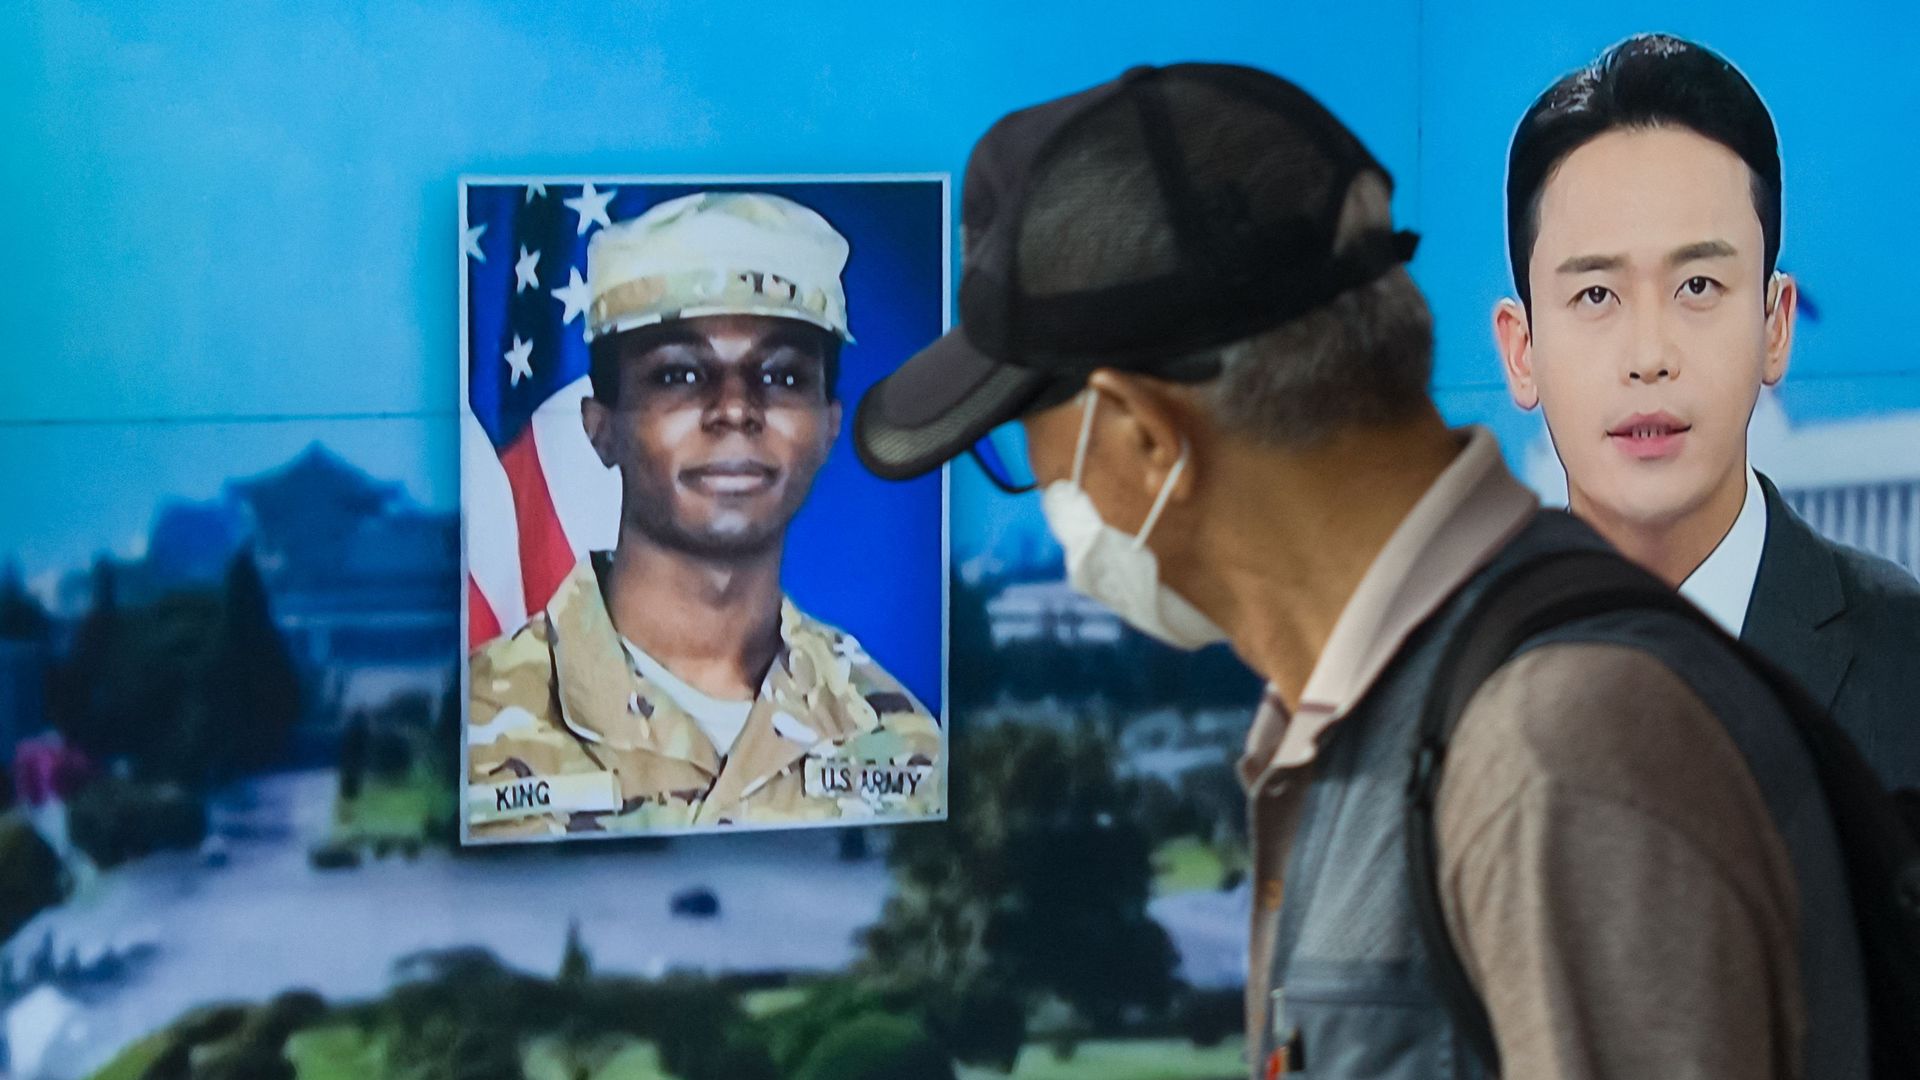 man walks past a television showing a news broadcast featuring a photo of US soldier Travis King